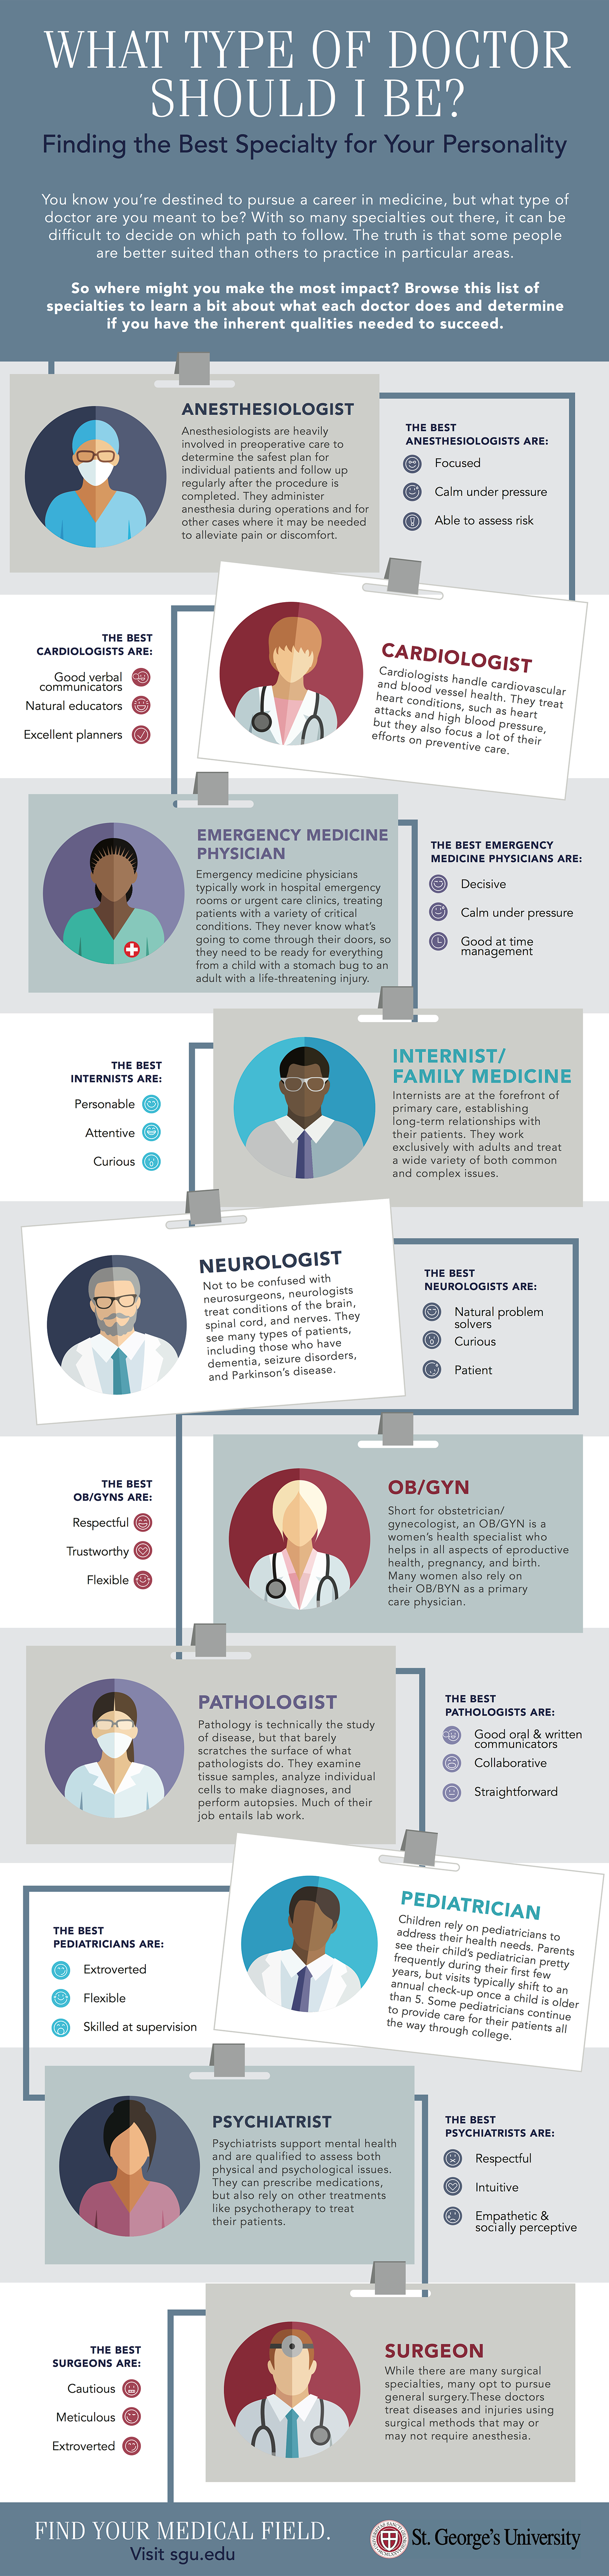 what-type-of-doctor-should-i-be-finding-the-best-specialty-for-your-personality-infographic